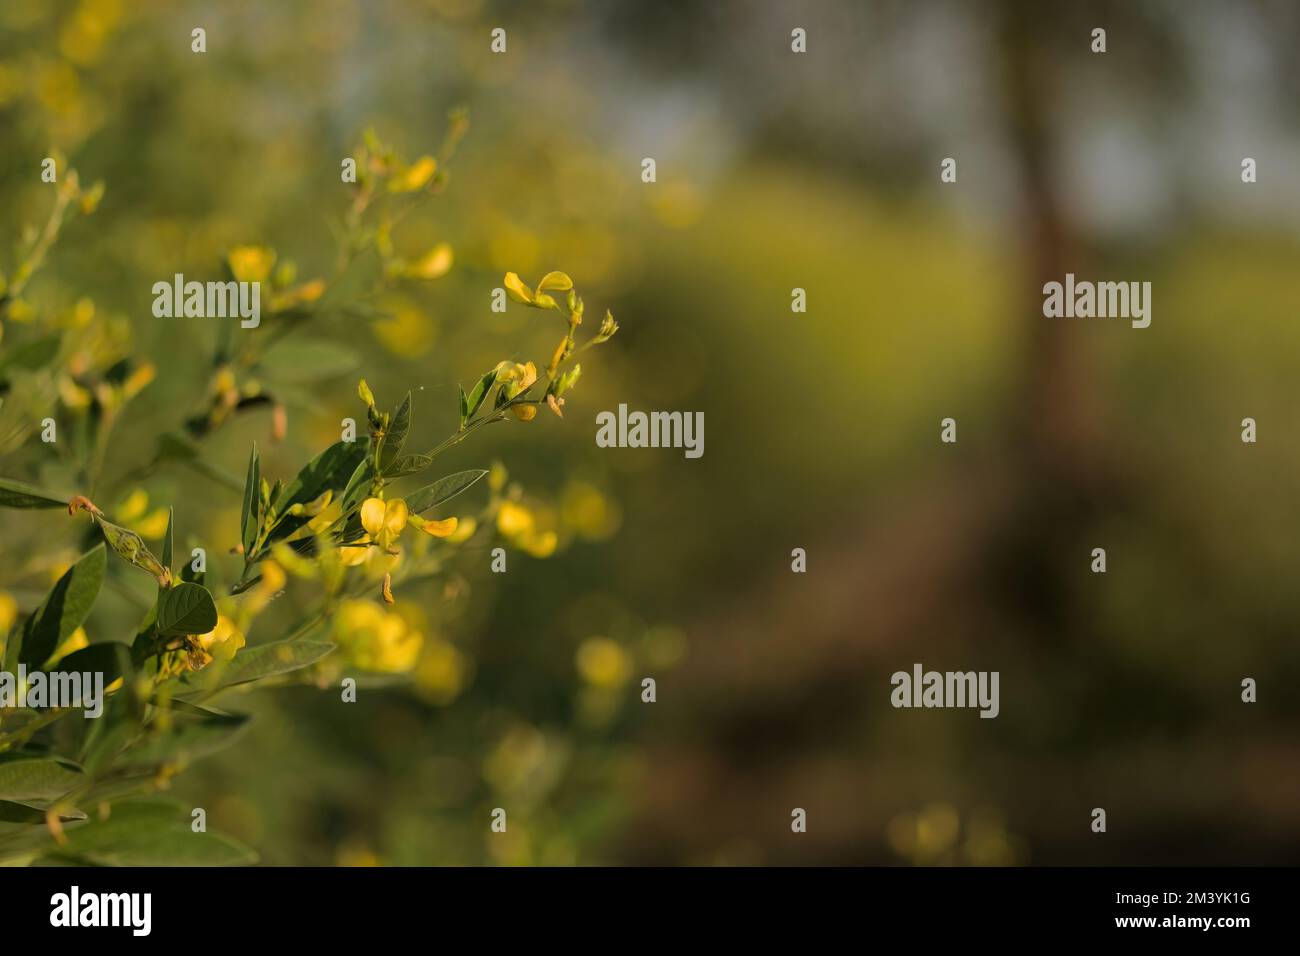 Plants of Pigeon pea with flowering yellow flower in the agriculture field with copy space. Stock Photo